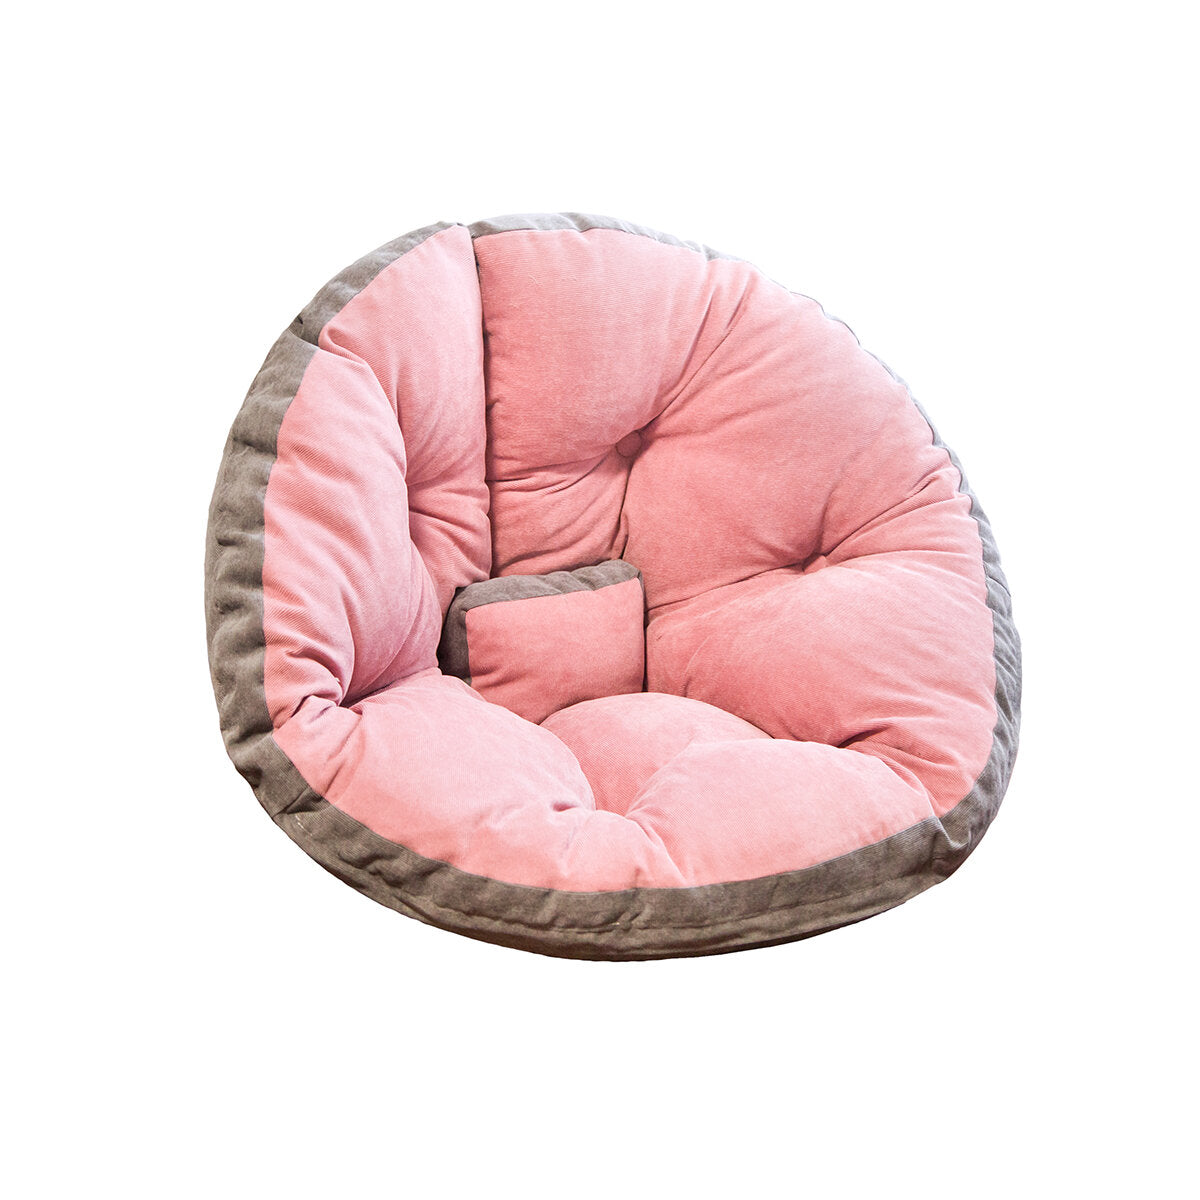 Hammock Chair Seat Cushion Hanging Swing Seat Pad Egg Chair Bed Back Pad Hanging Chair Pillow Home Office Furniture Accessories